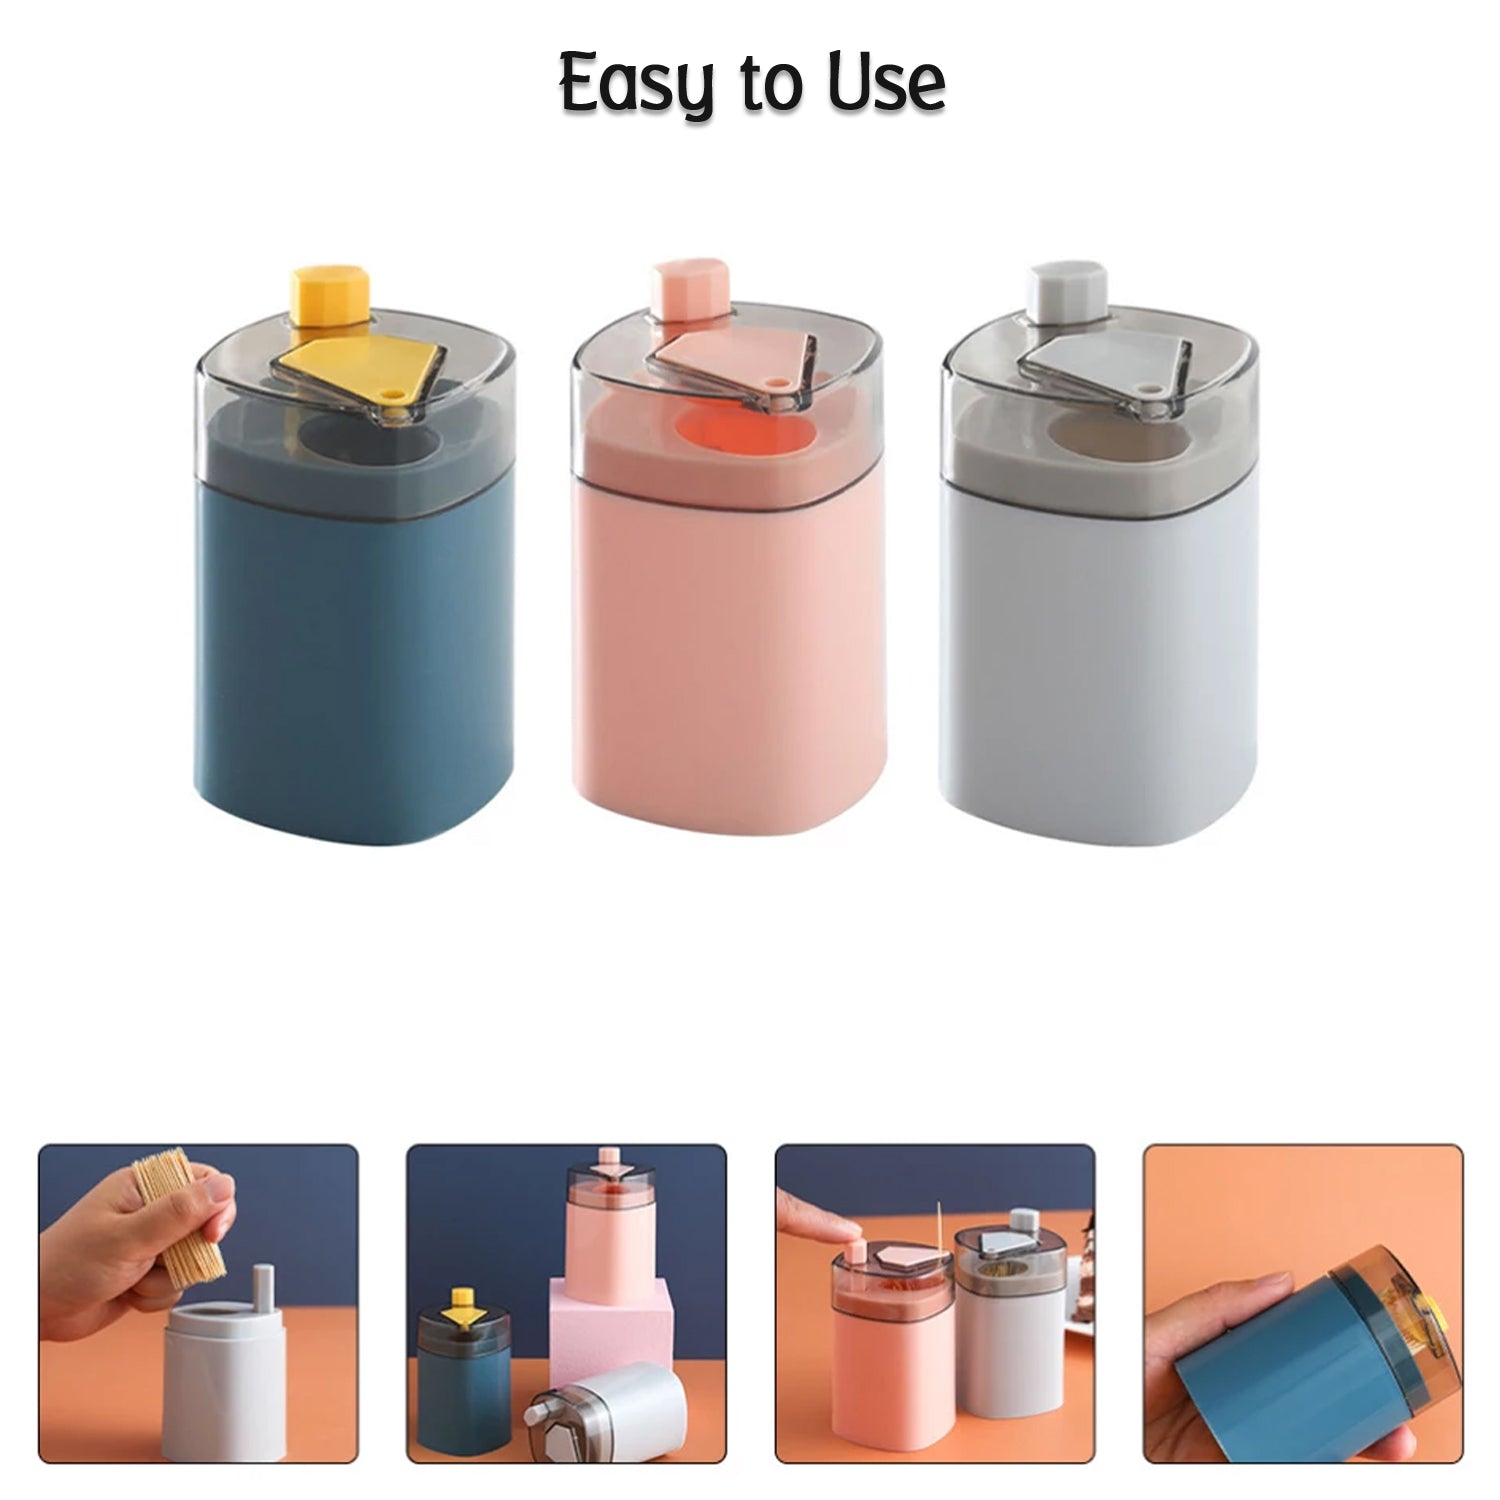 Toothpick Holder Dispenser, Pop-Up Automatic Toothpick Dispenser for Kitchen Restaurant Thickening Toothpicks Container Pocket Novelty, Safe Container Toothpick Storage Box